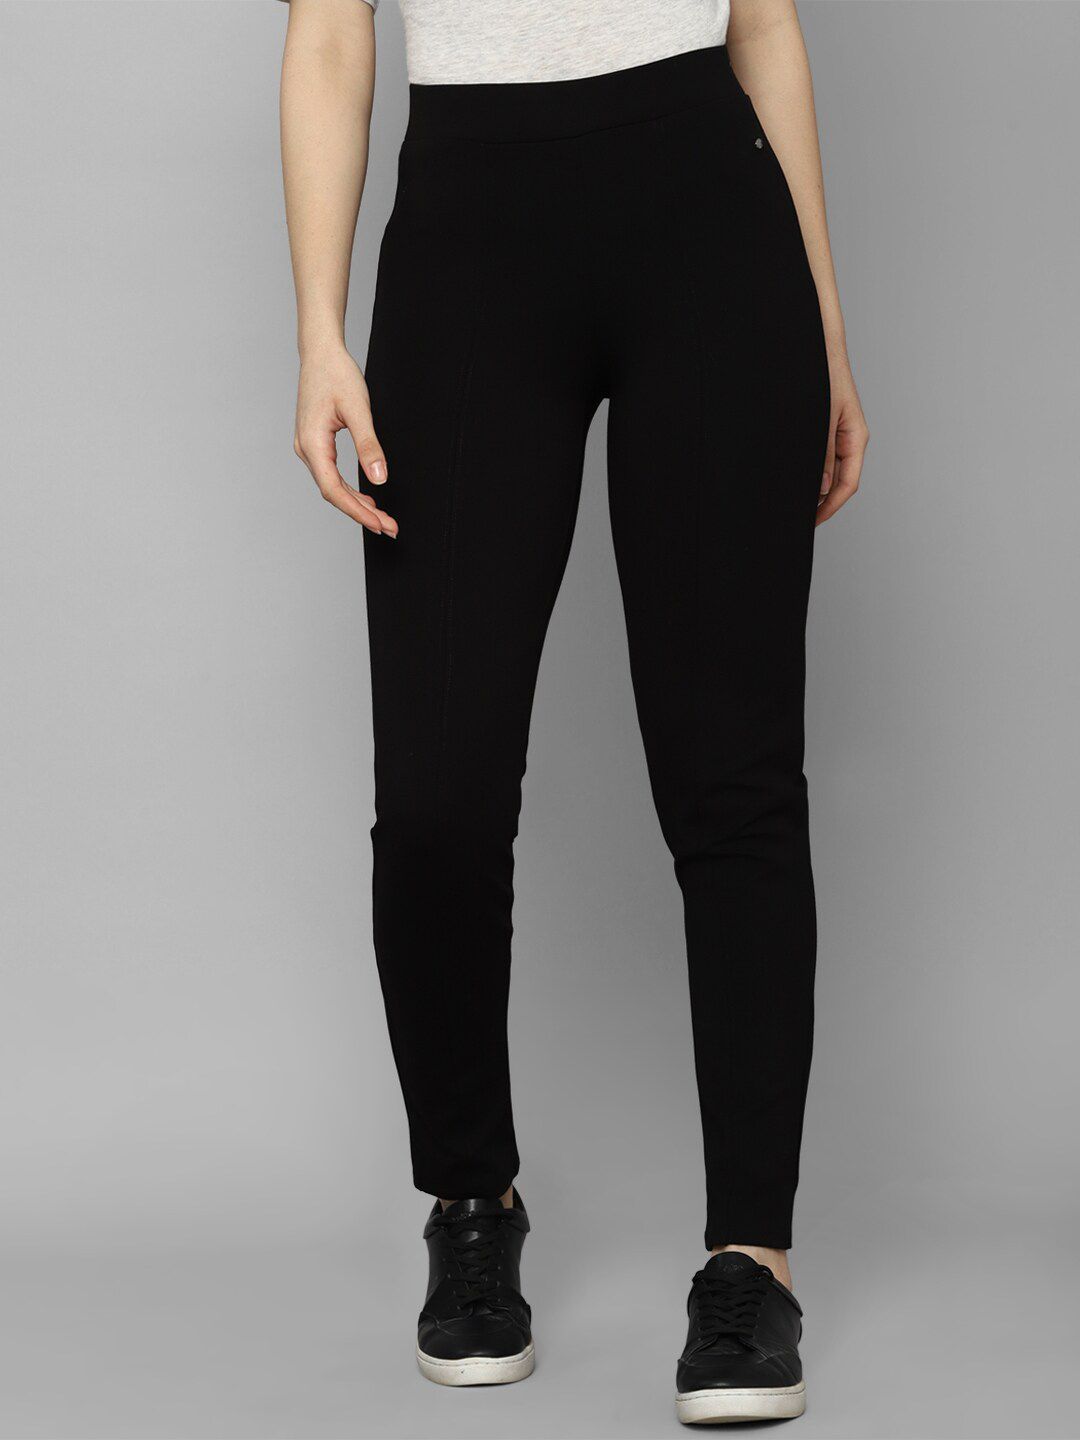 Allen Solly Woman Black Trousers Price in India